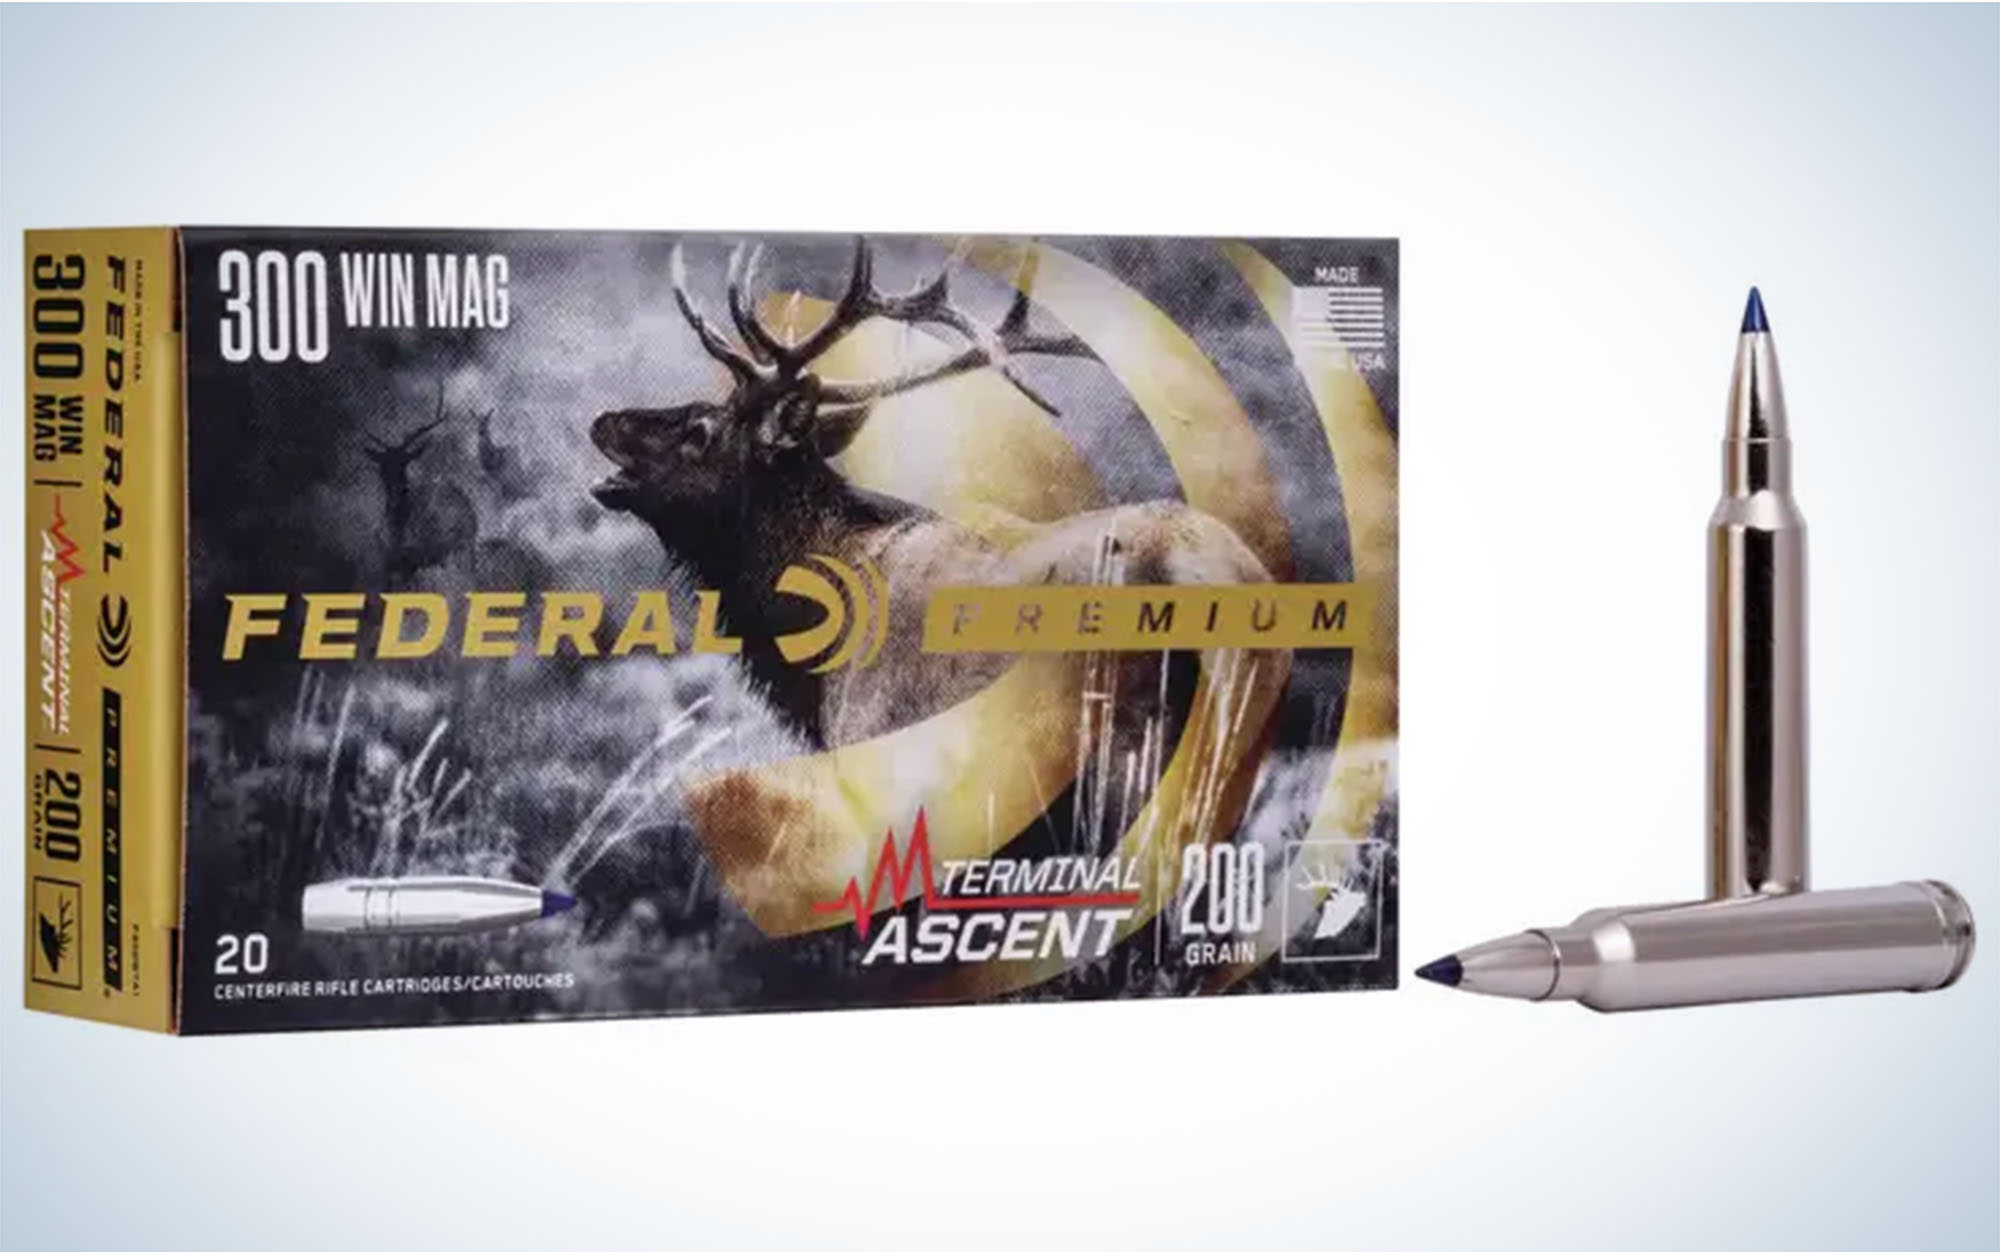 Federal Premium Terminal Ascent 200-grain is best for big game.